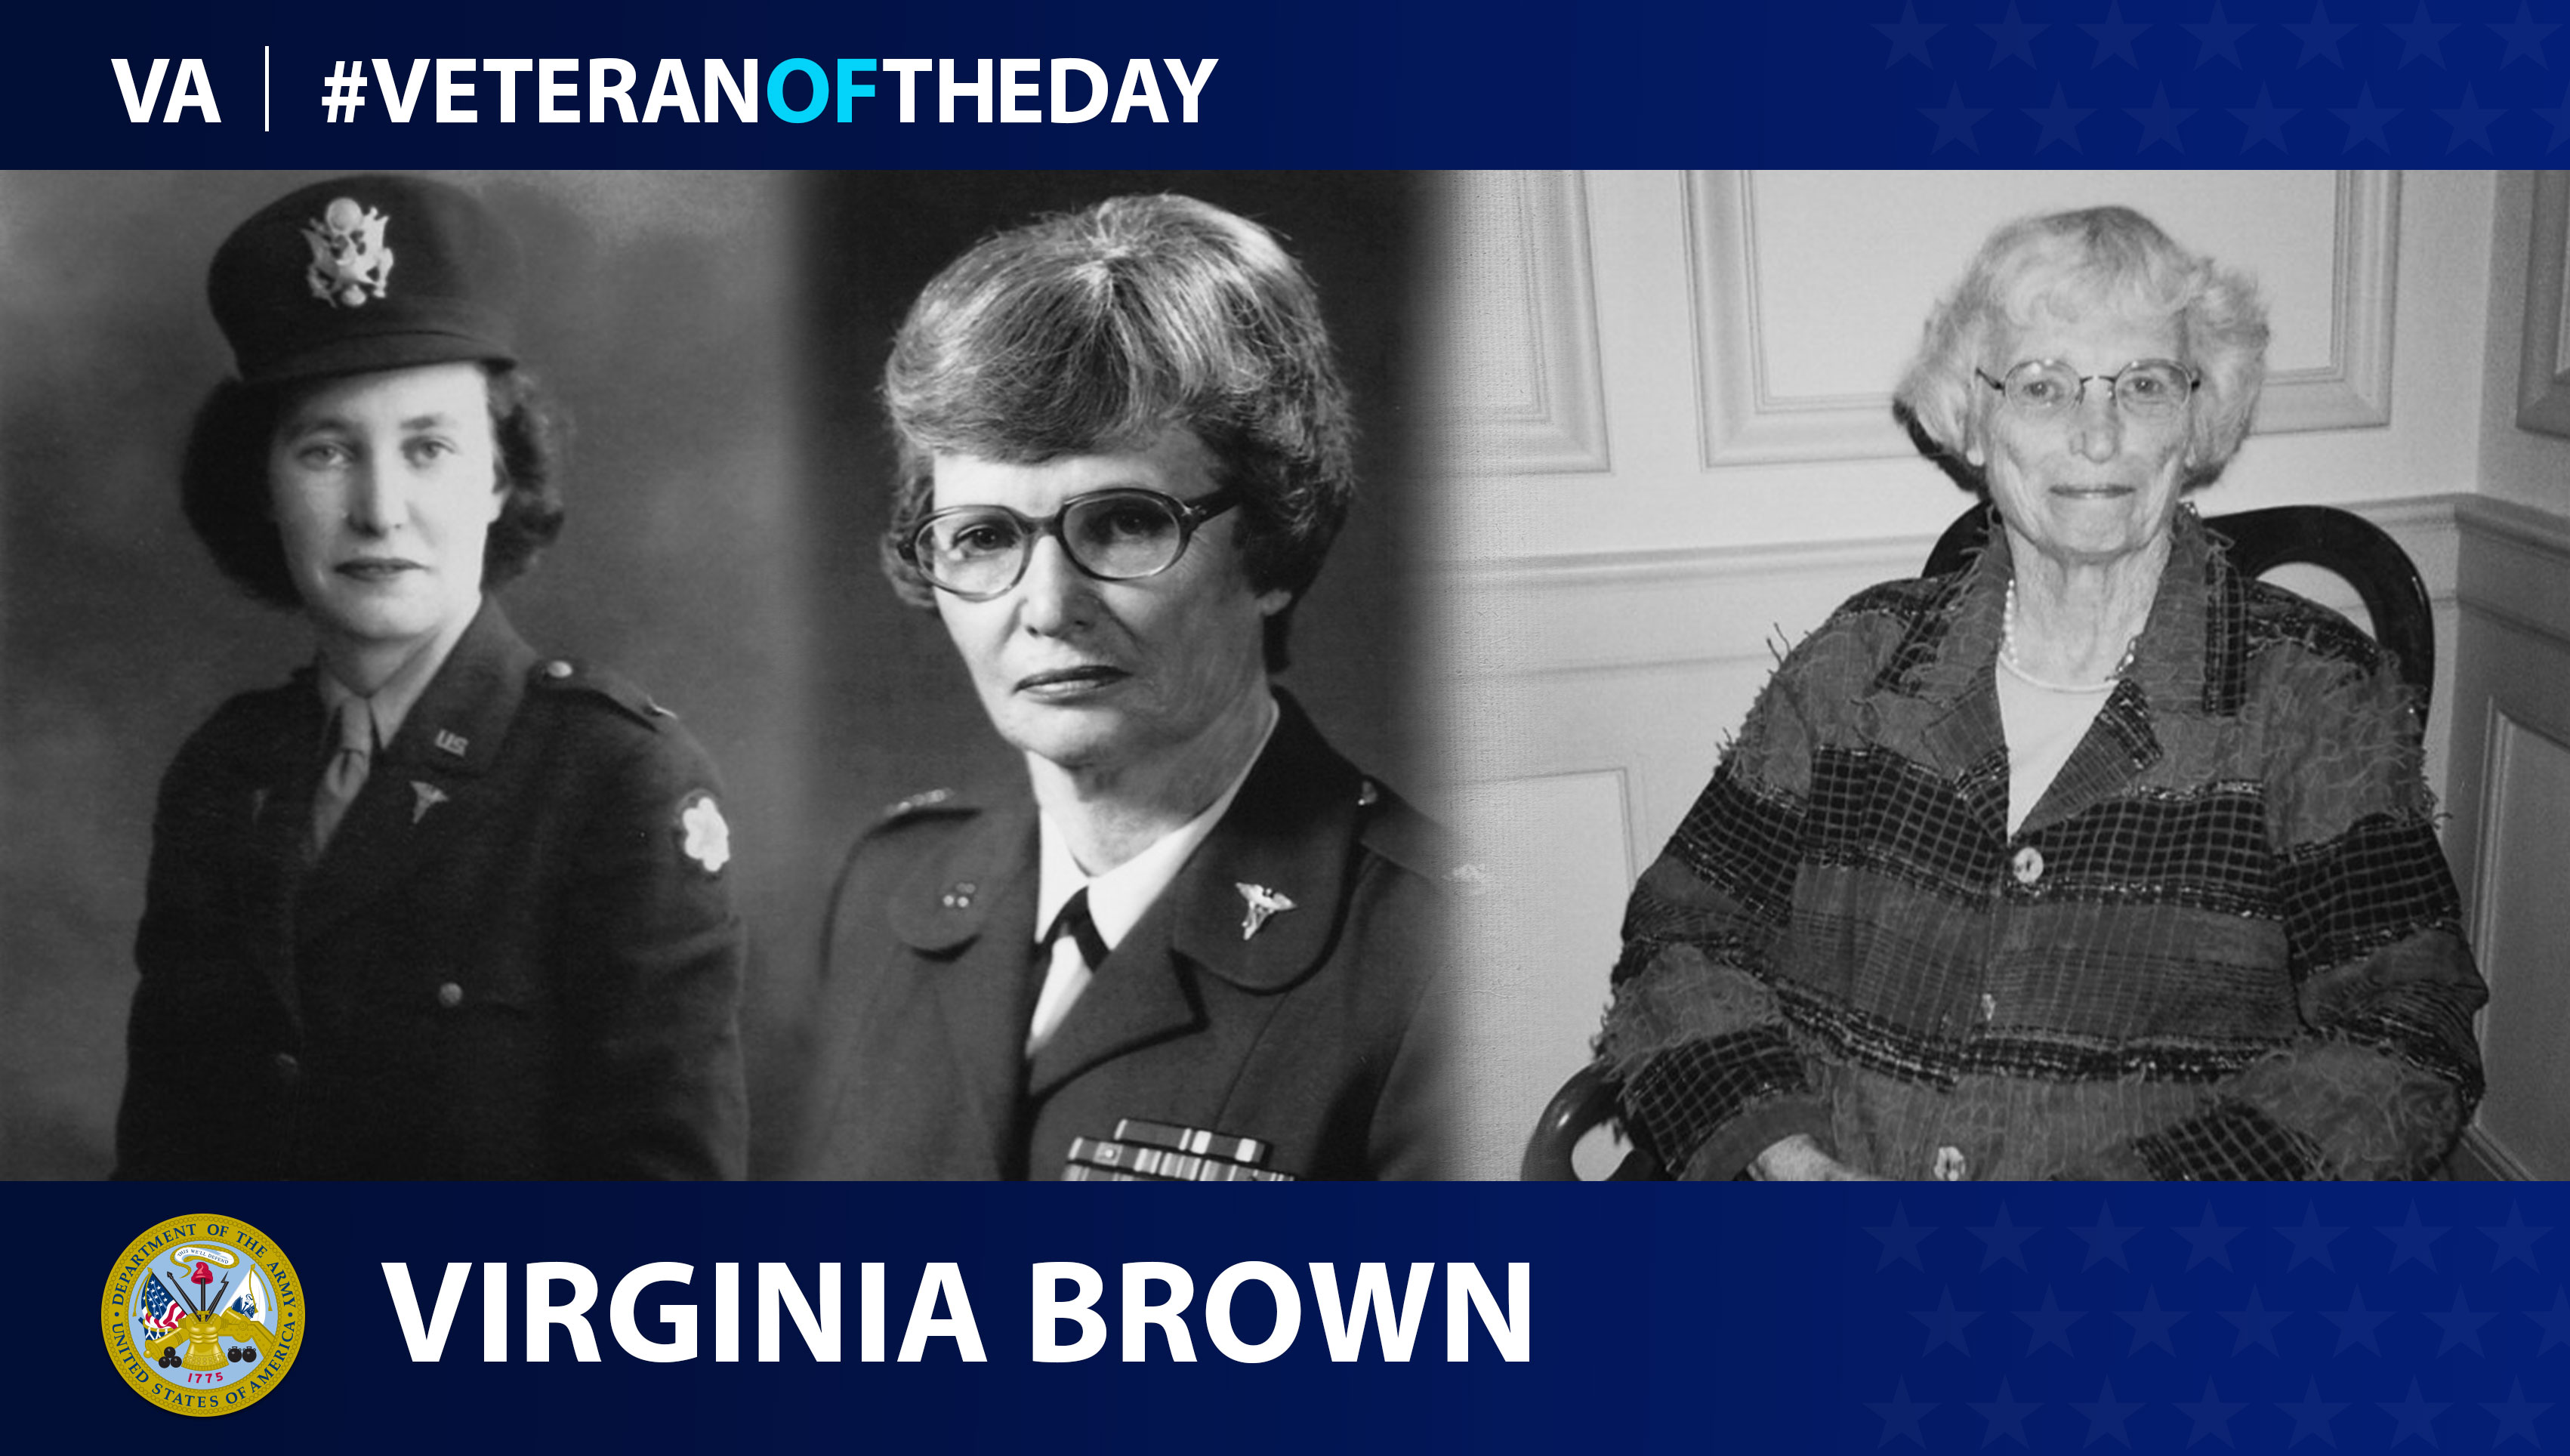 Army Veteran Virginia Louise Brown is today's Veteran of the Day.